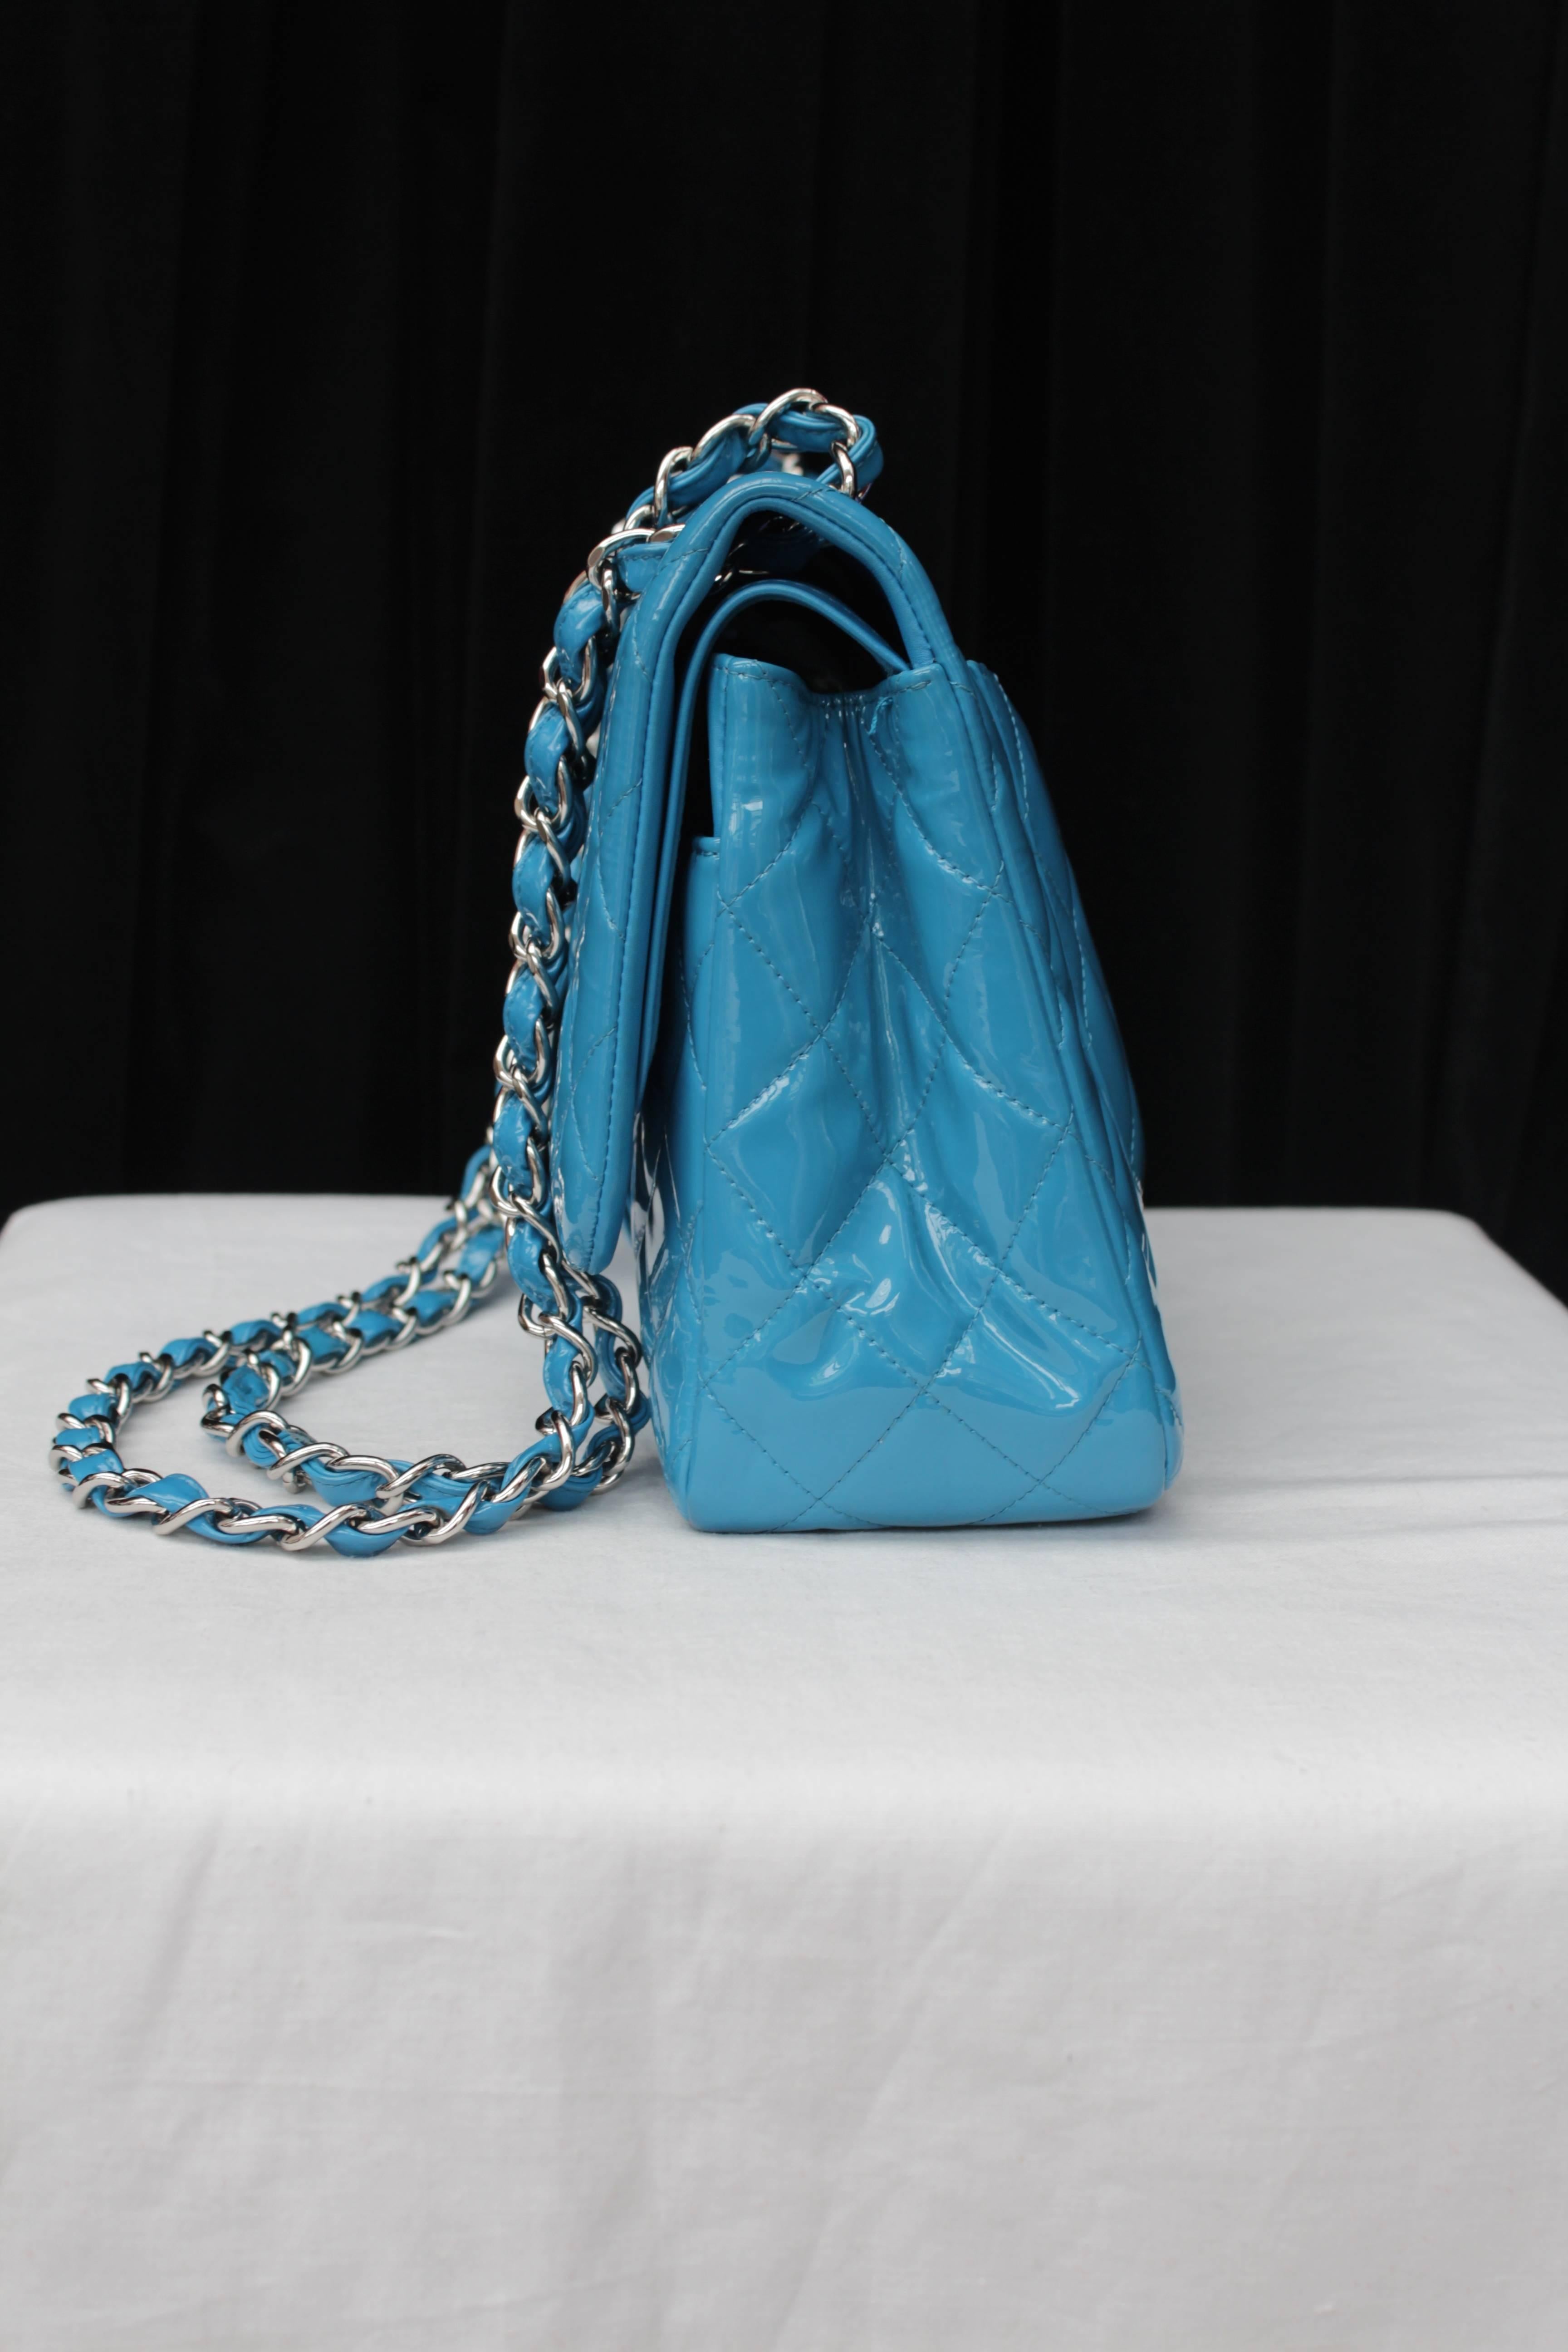 Blue 2000s Chanel Jumbo Timeless Bag in Patent Turquoise Leather and Silver Hardware